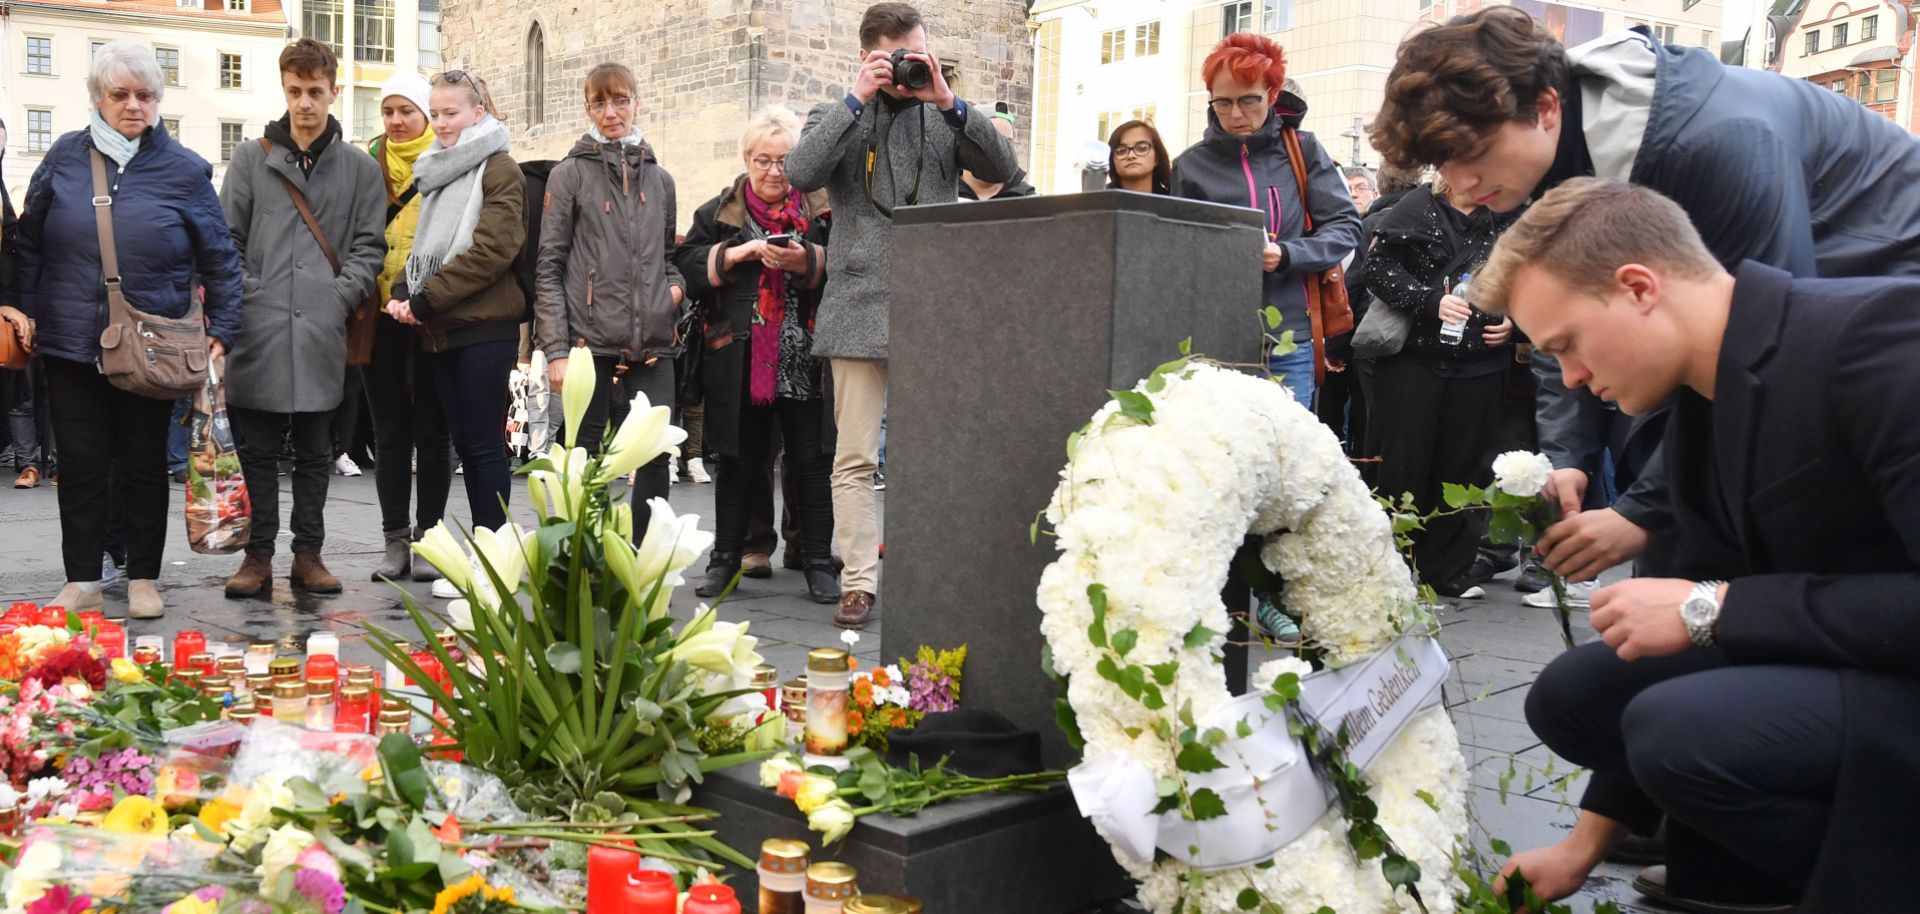 Mourners place flowers at a makeshift memorial on Oct. 10, 2019, at the market square in Halle, Germany, one day after a deadly anti-Semitic shooting.